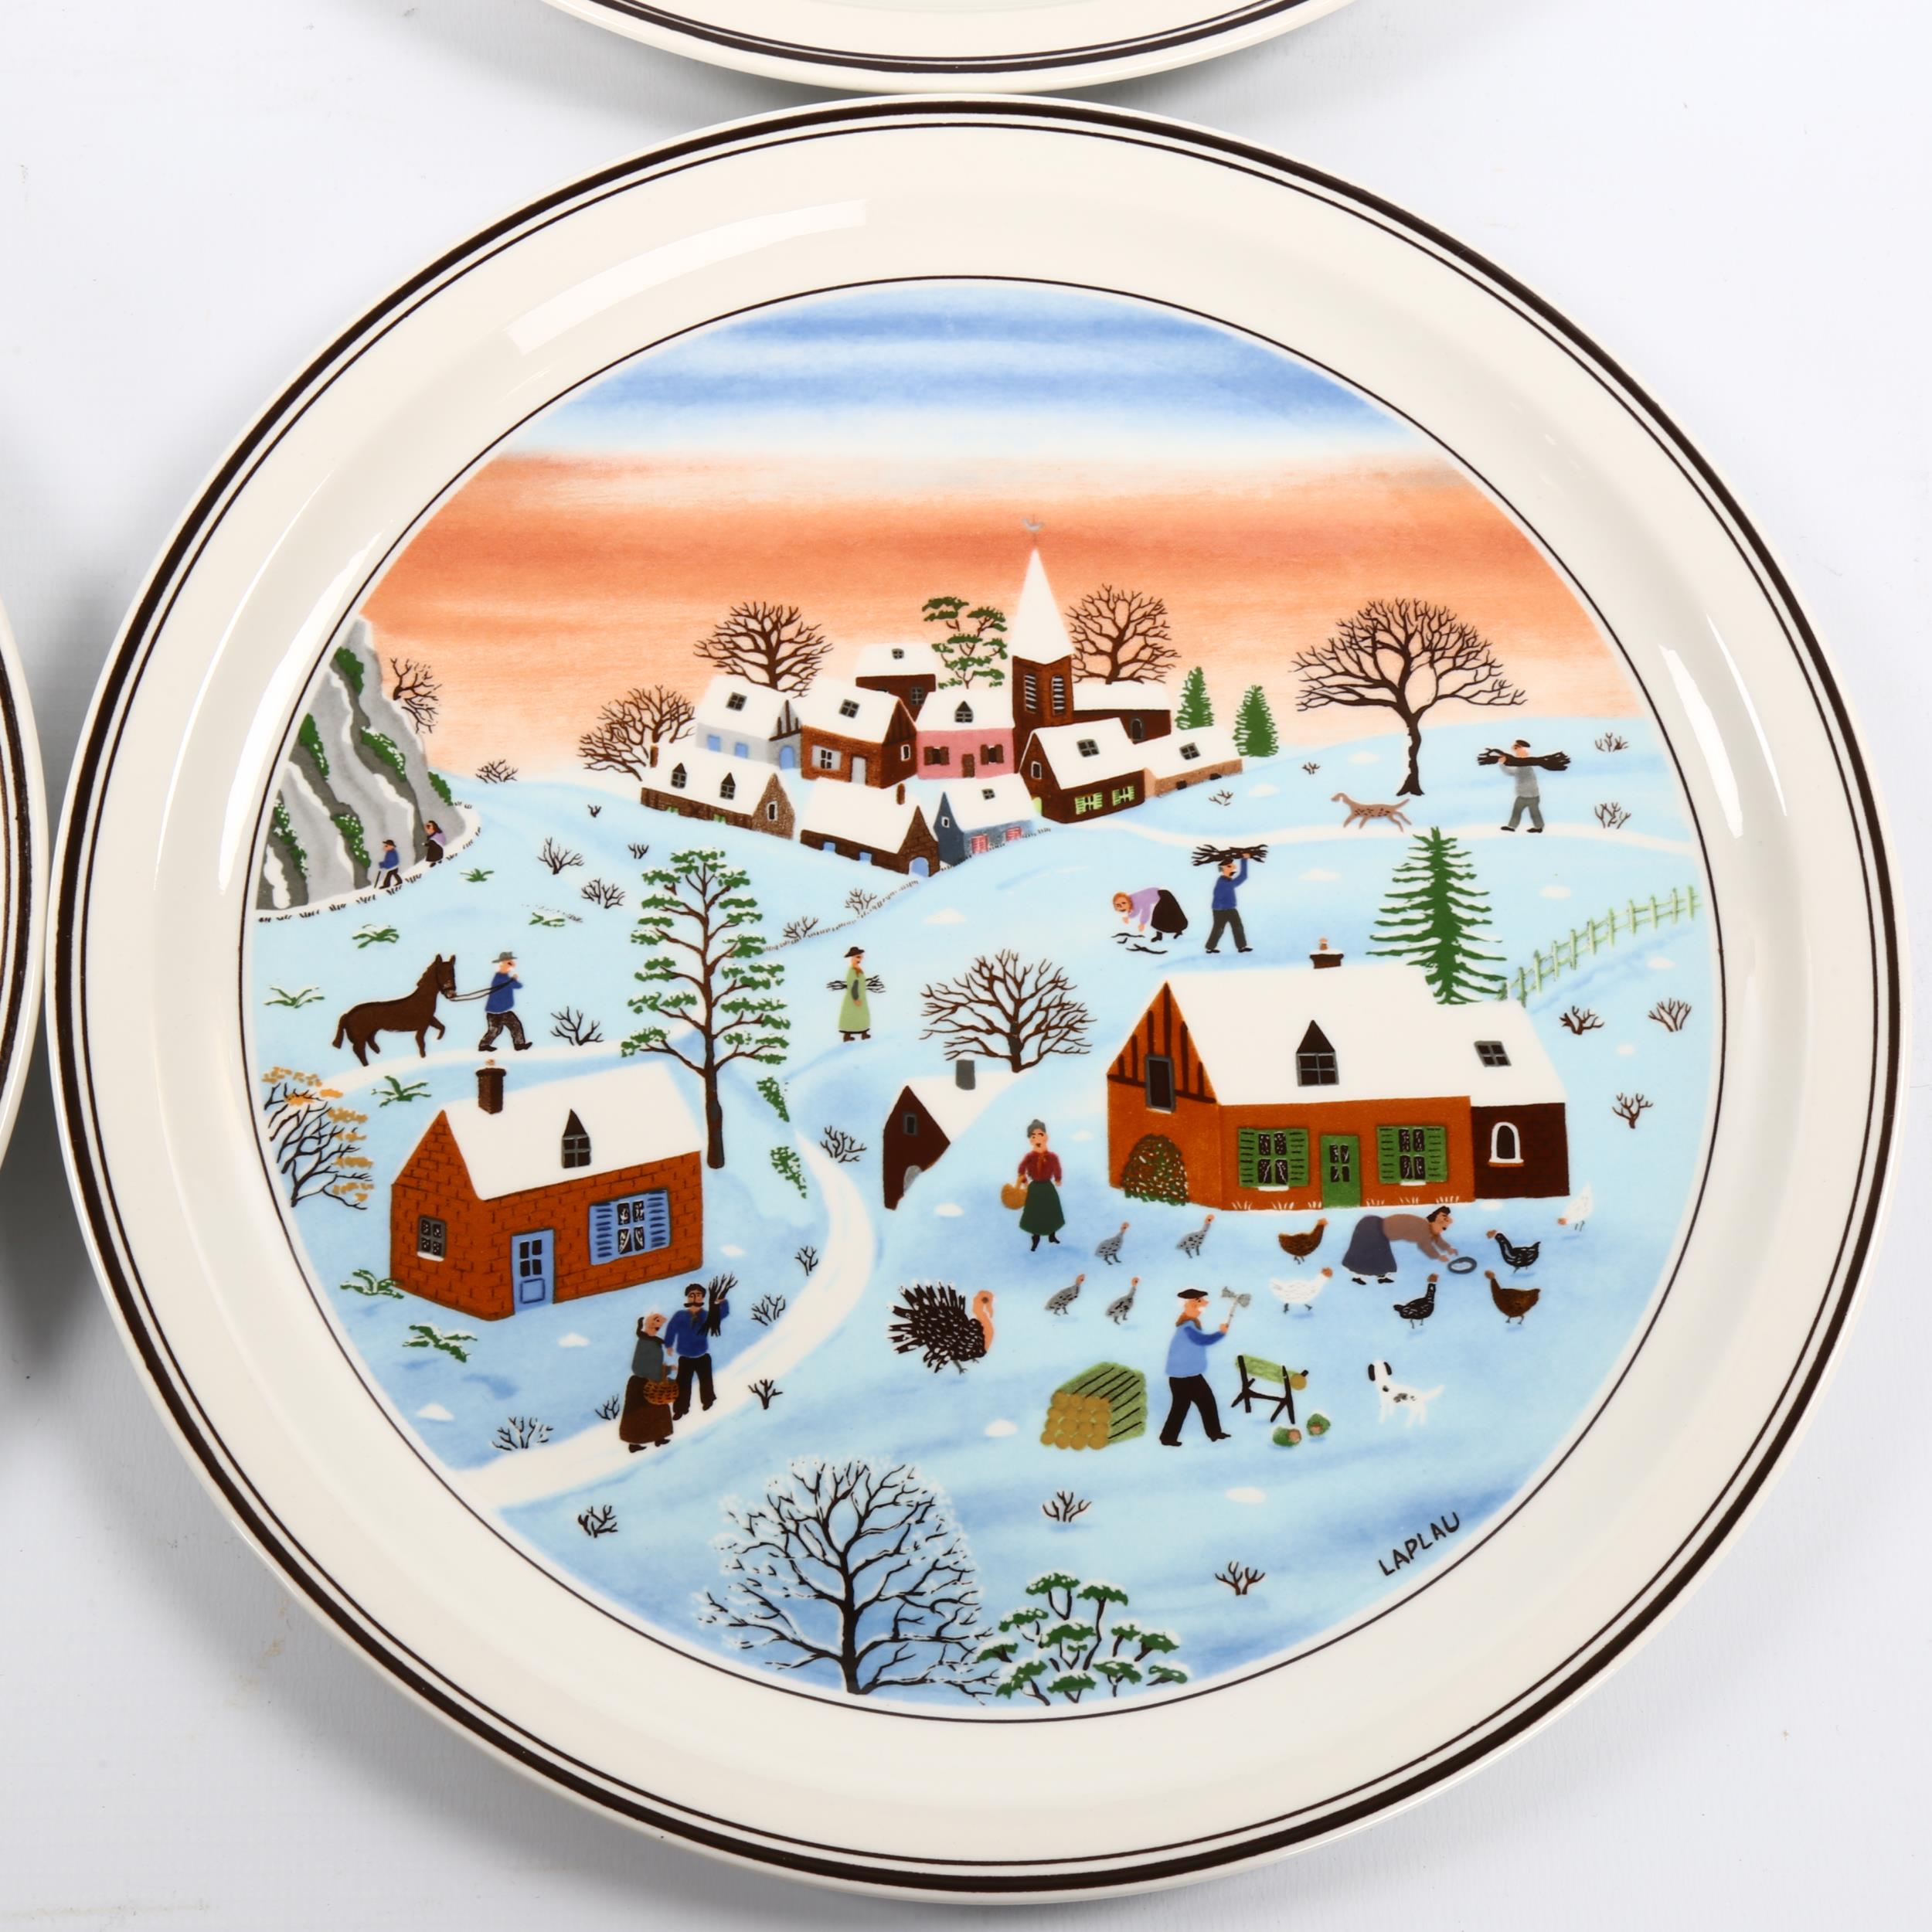 GERARD LAPLAU for VILLEROY and BOCH, a collection of 4 seasons plates, diameter 23cm Good condition - Image 2 of 3